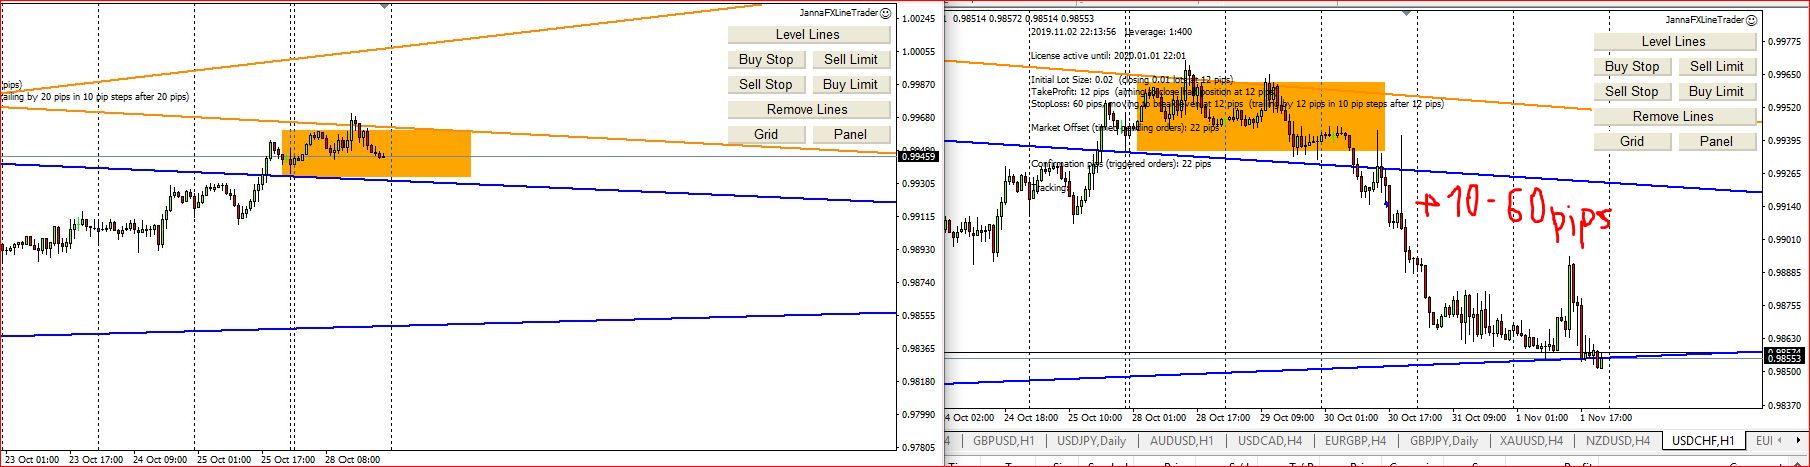 How My Forex Technical Analysis Works, Results 1